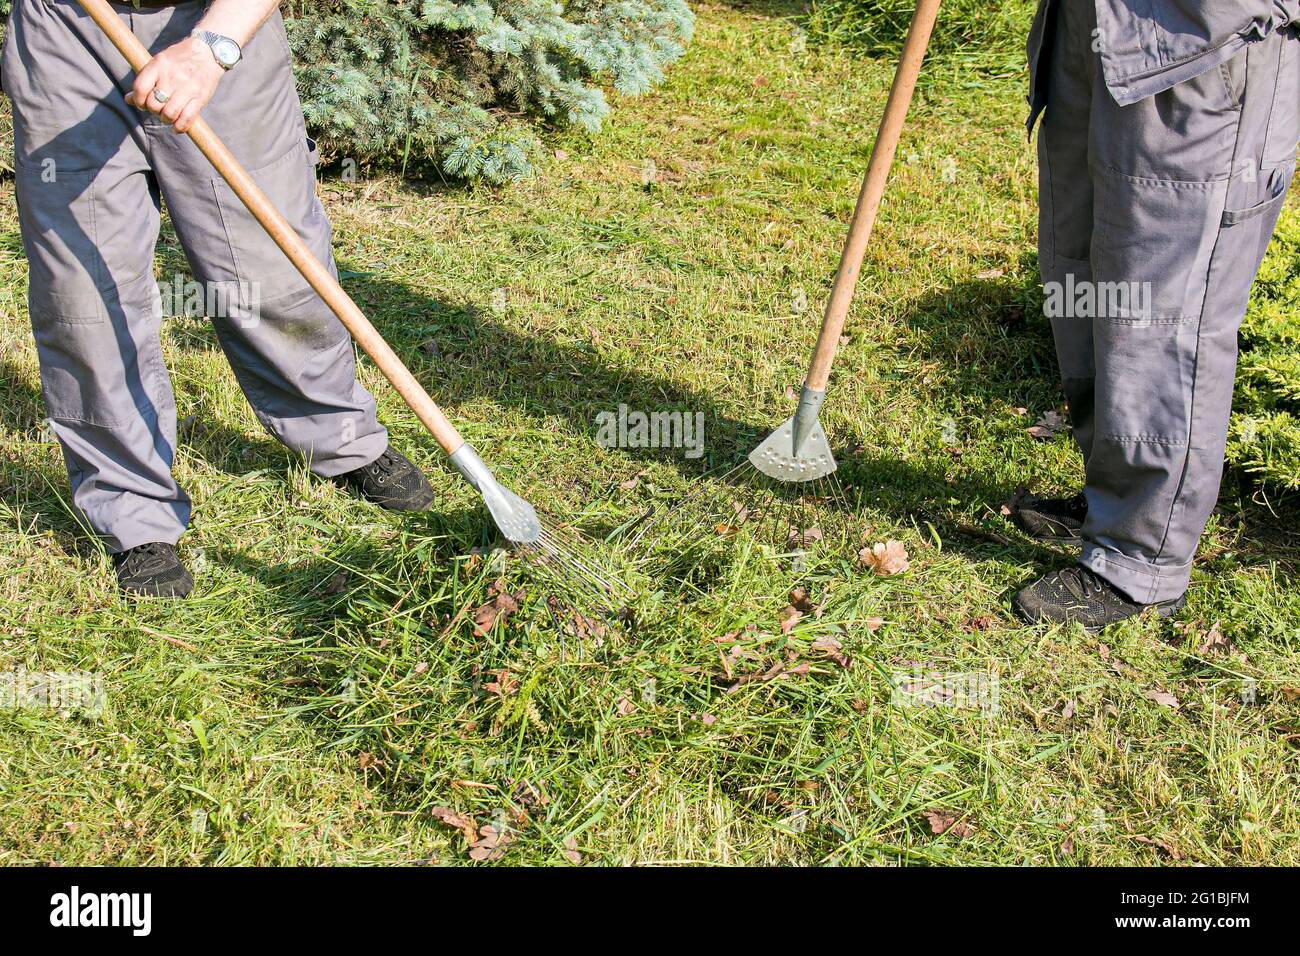 Employees of the city utilities are engaged in cleaning dry leaves on the lawn of the city park. Rake work. Stock Photo